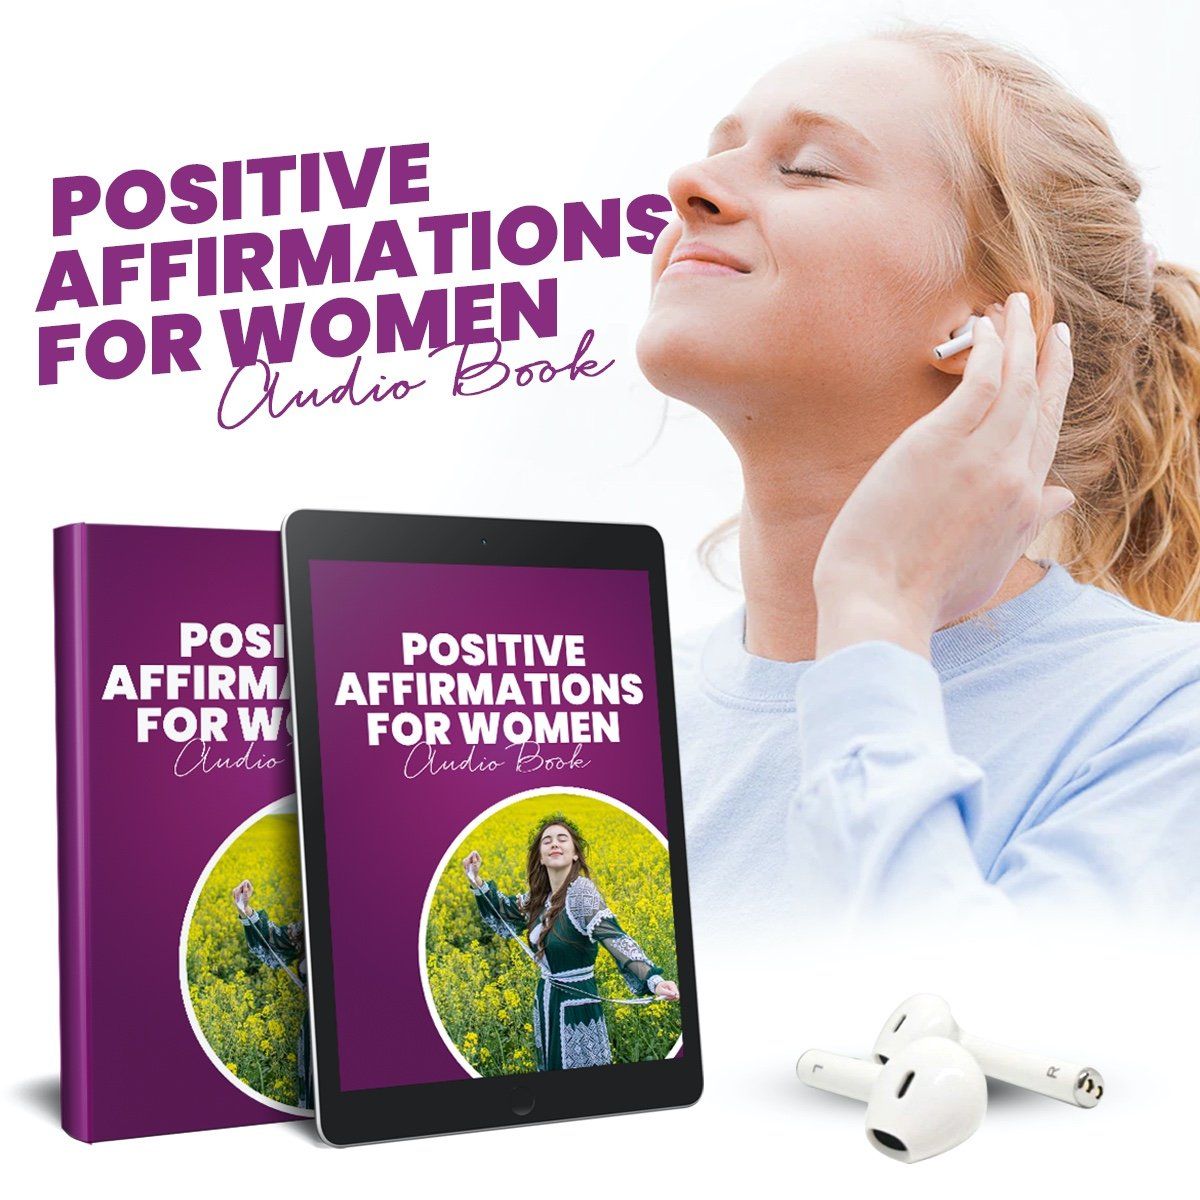 The Positive Affirmations Audiobook